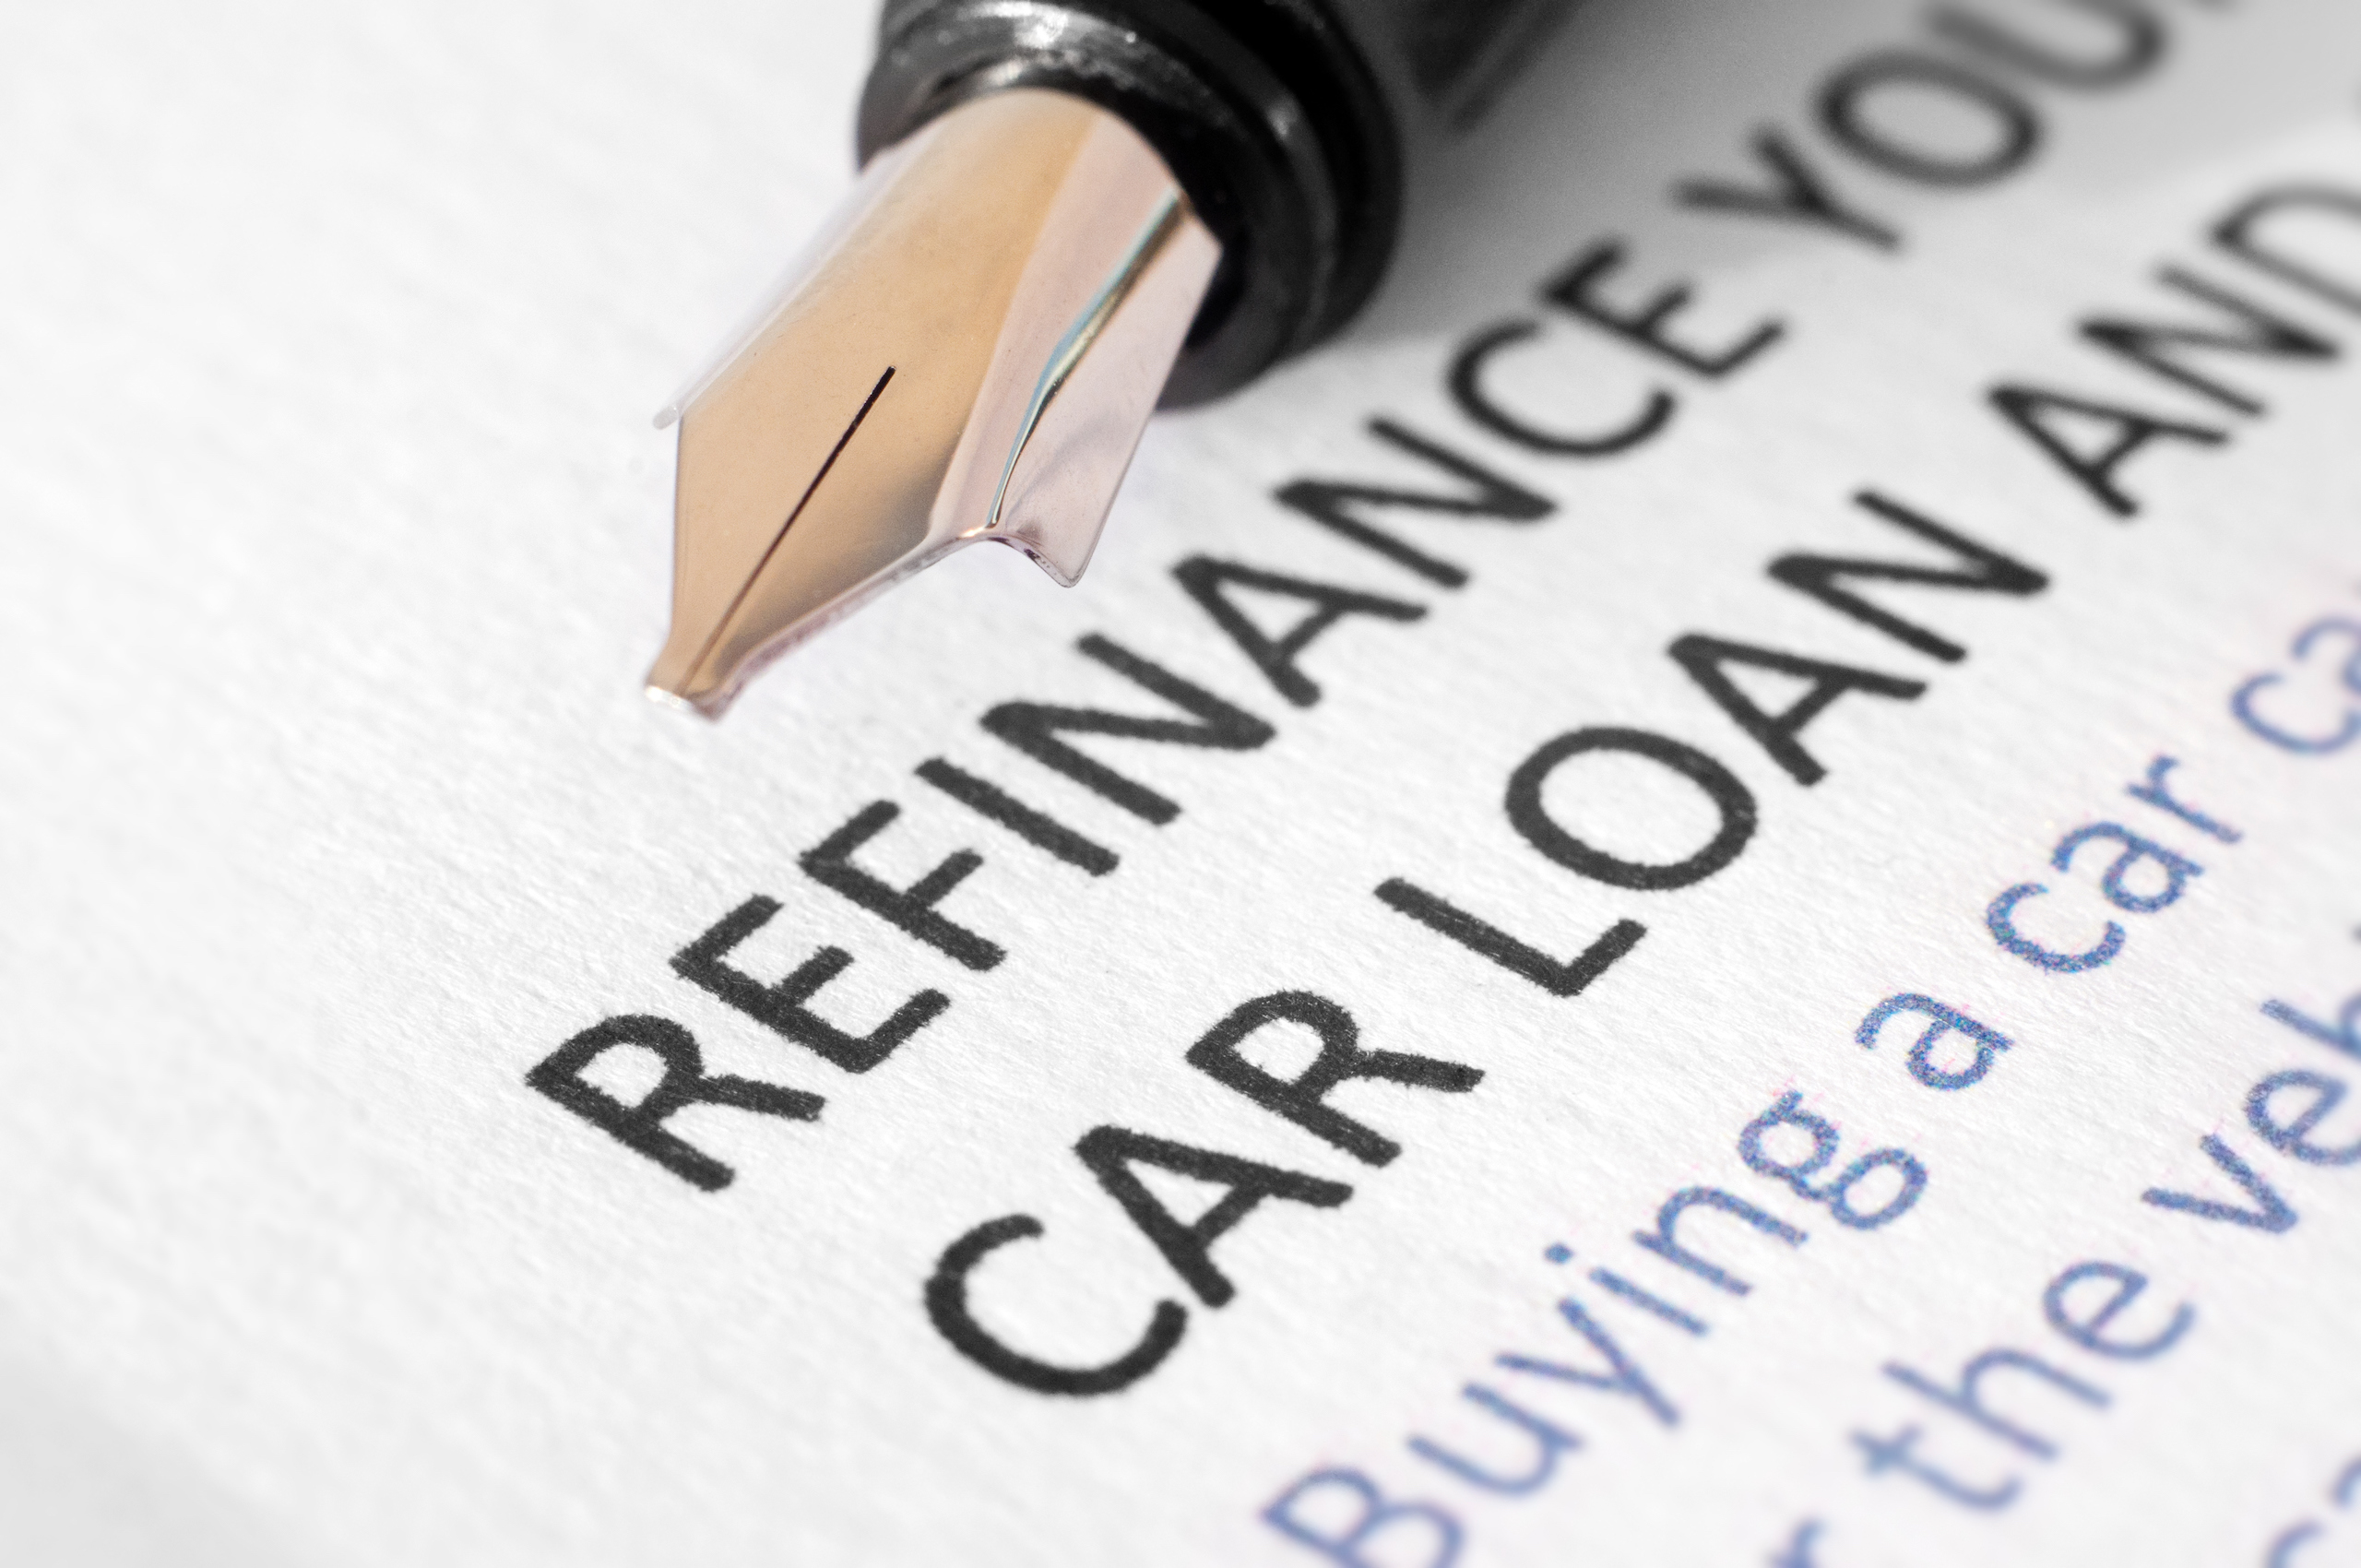 Close-up of Refinance your car loan document with pen